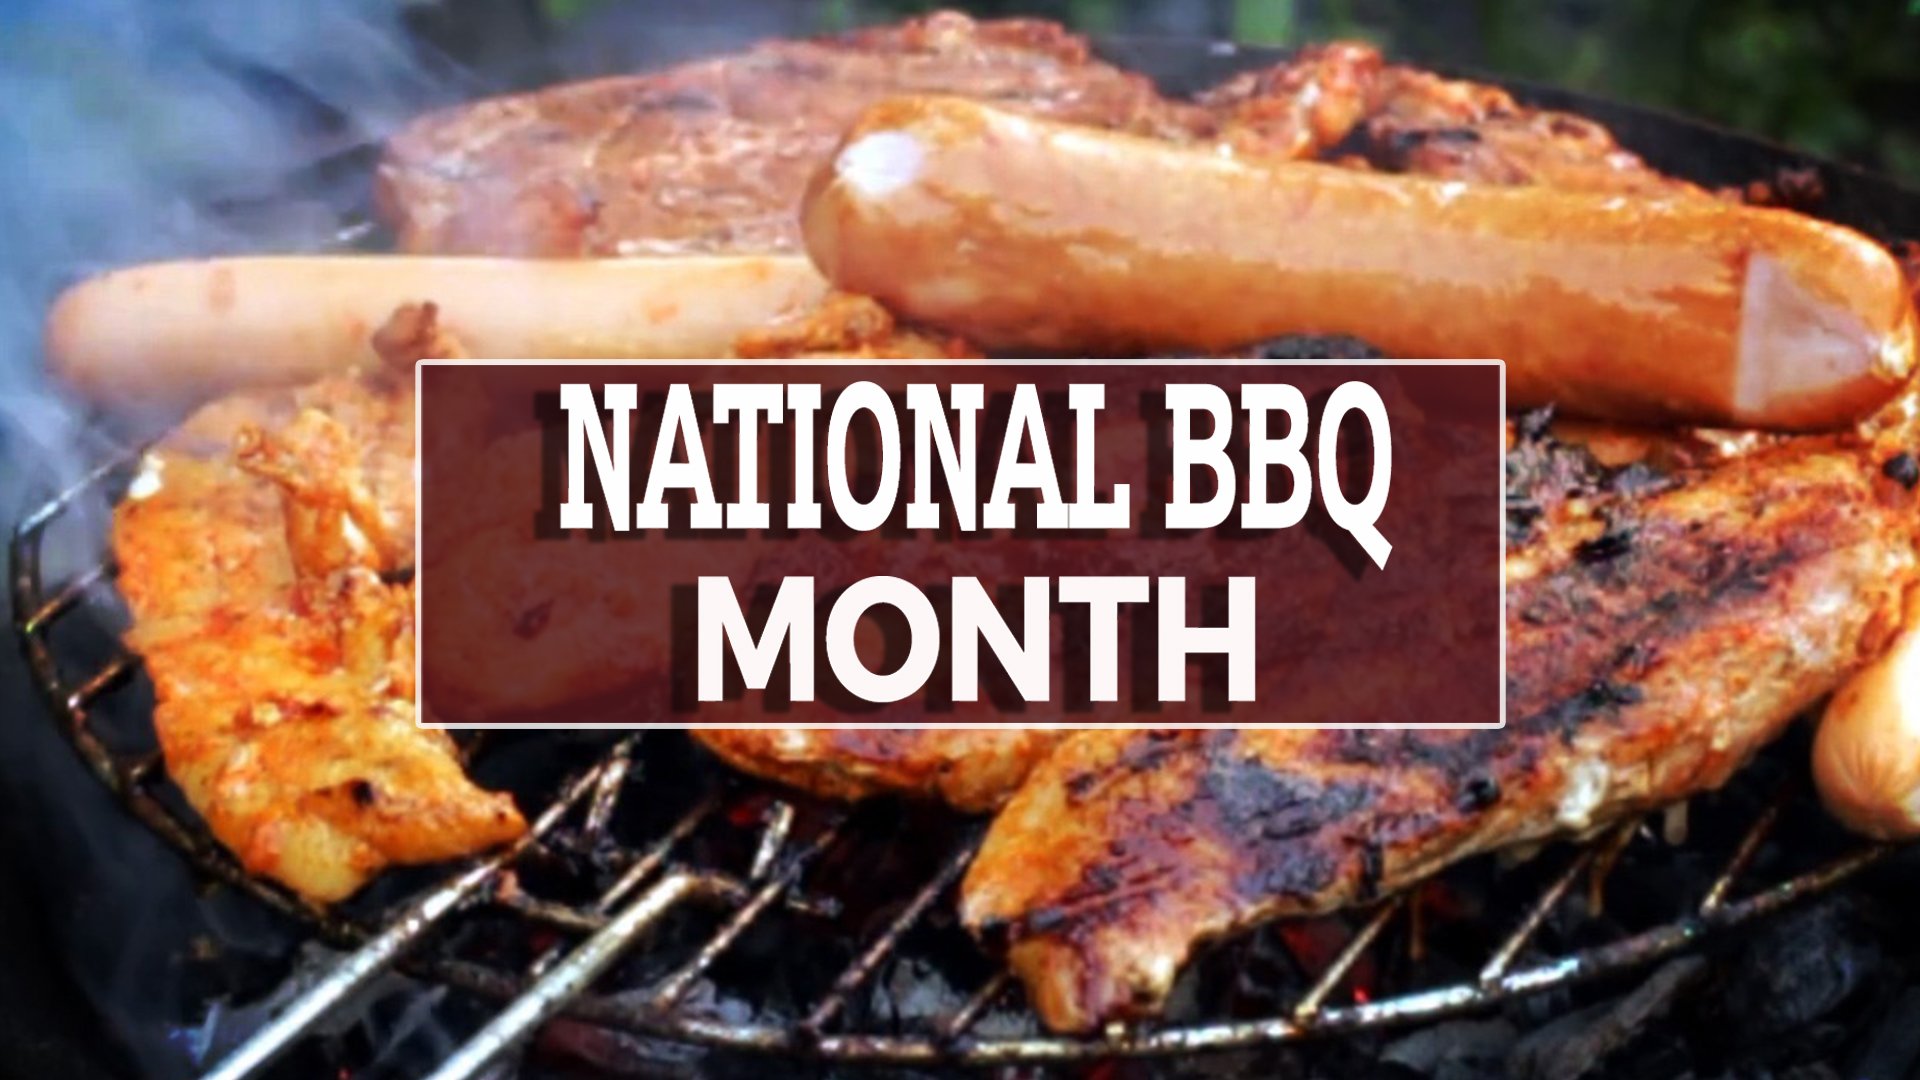 Celebrate National Barbecue Month with a new recipe 41NBC News WMGTDT